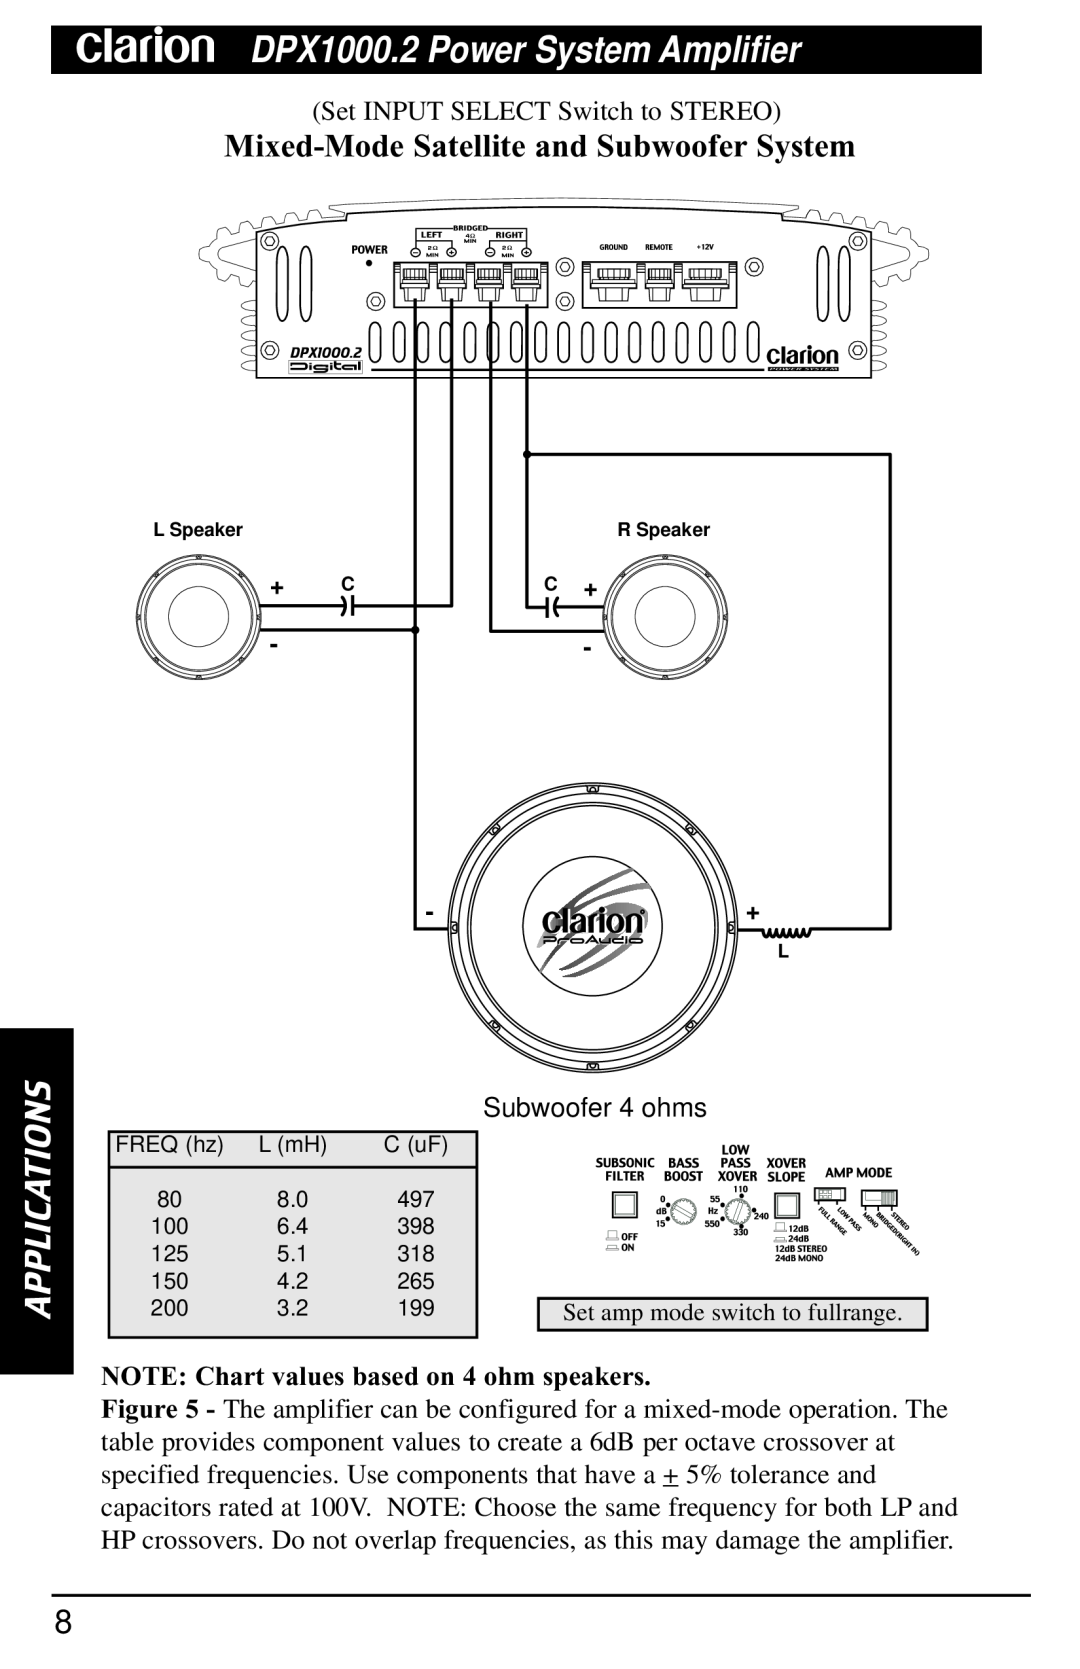 Clarion DPX1000.2 manual Mixed-ModeSatellite and Subwoofer System, Applications, NOTE Chart values based on 4 ohm speakers 